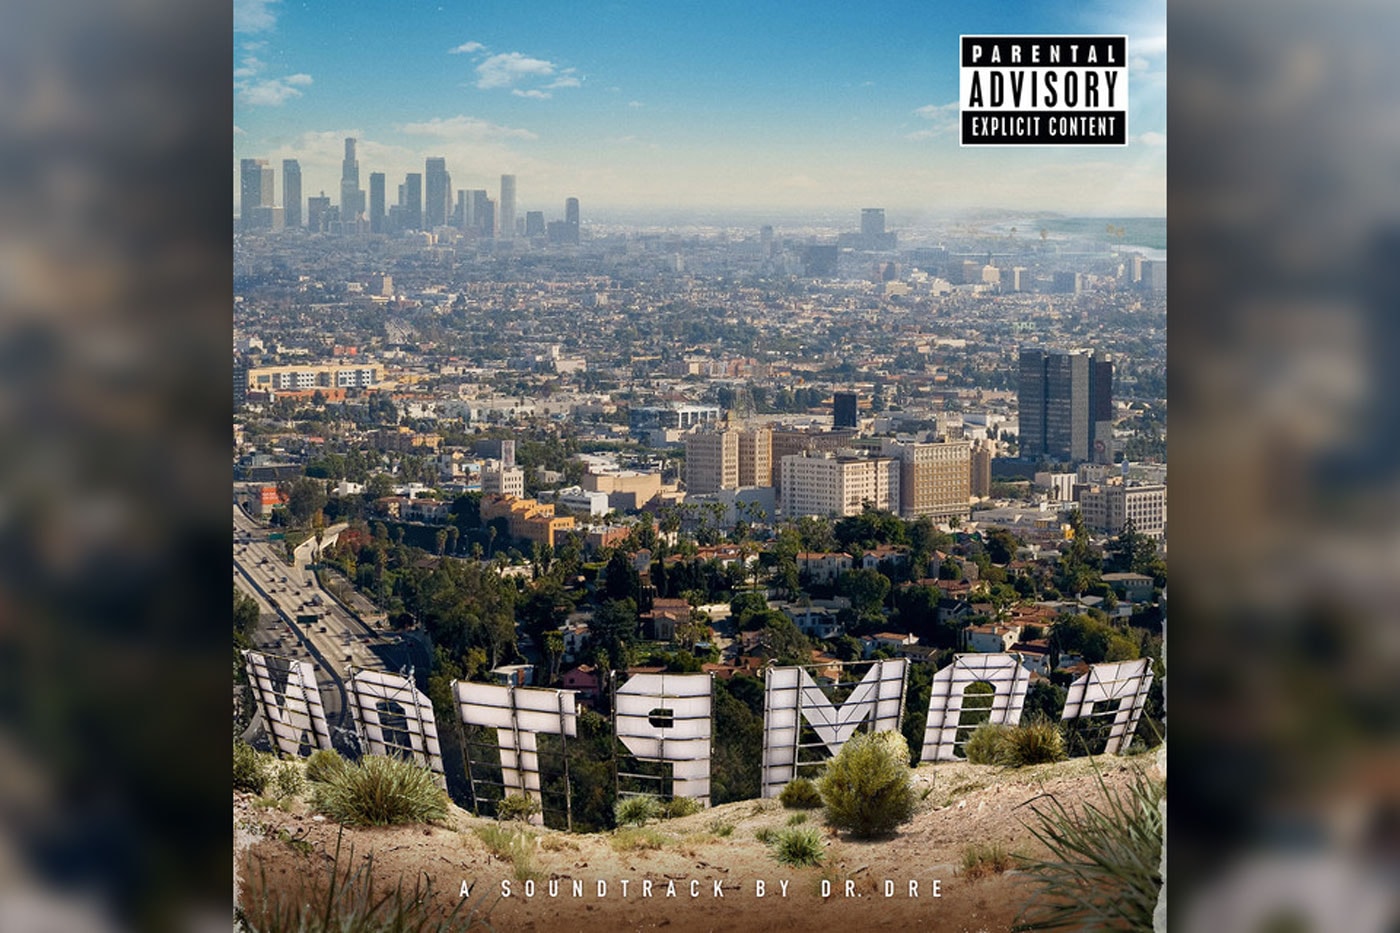 Dr. Dre Announces First Album in 15 Years